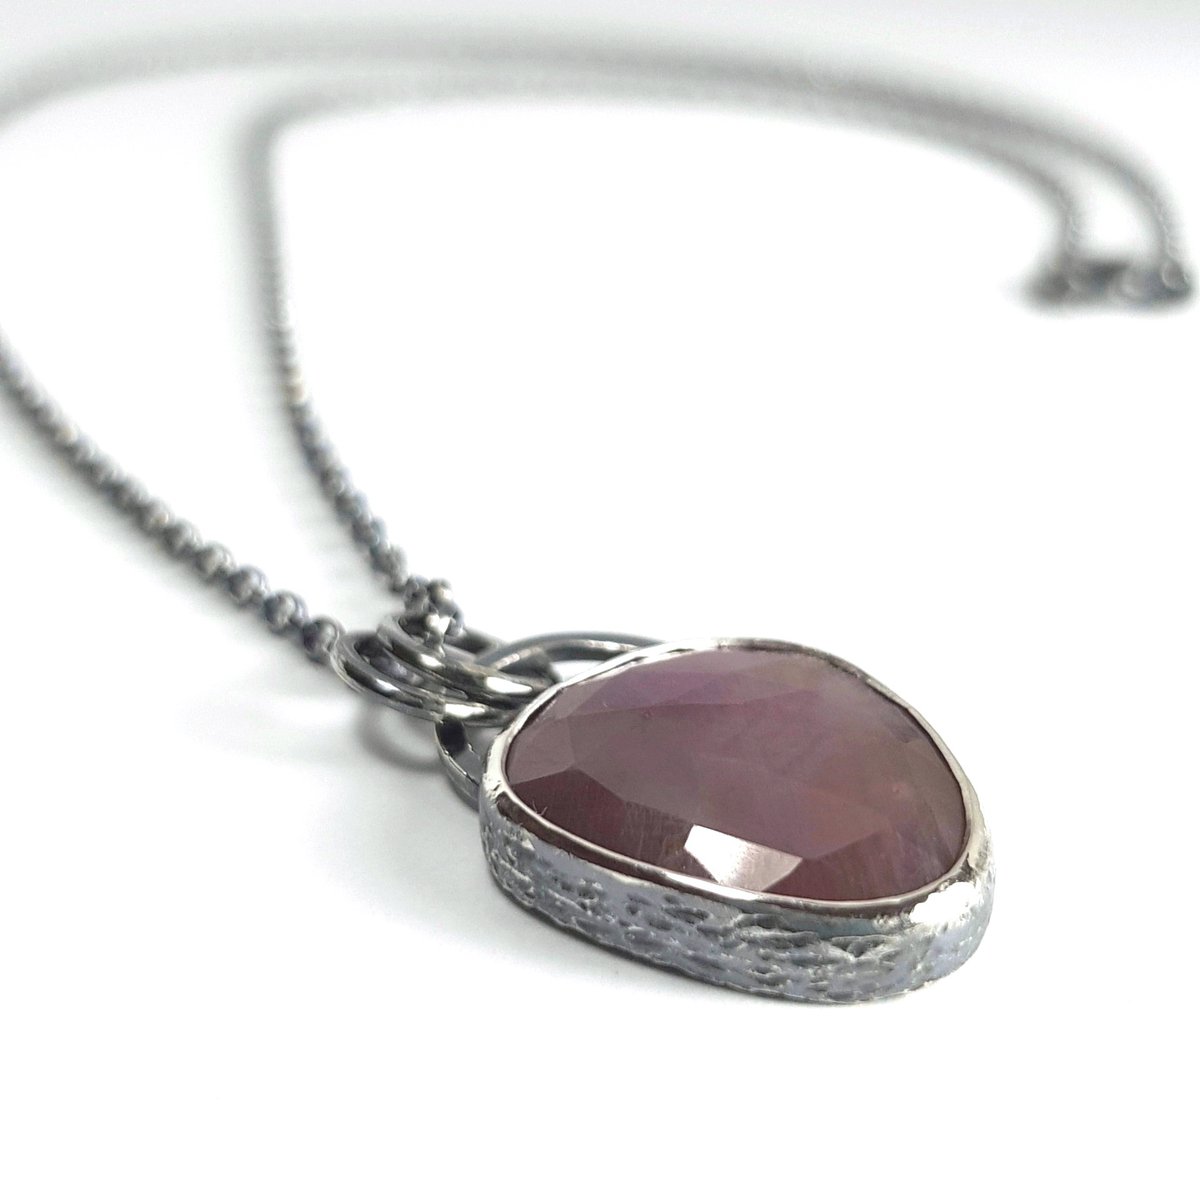 Image of Sterling Silver Sapphire Pendant, Handmade Statement Necklace with Unique Sapphire, Recycled Silver 